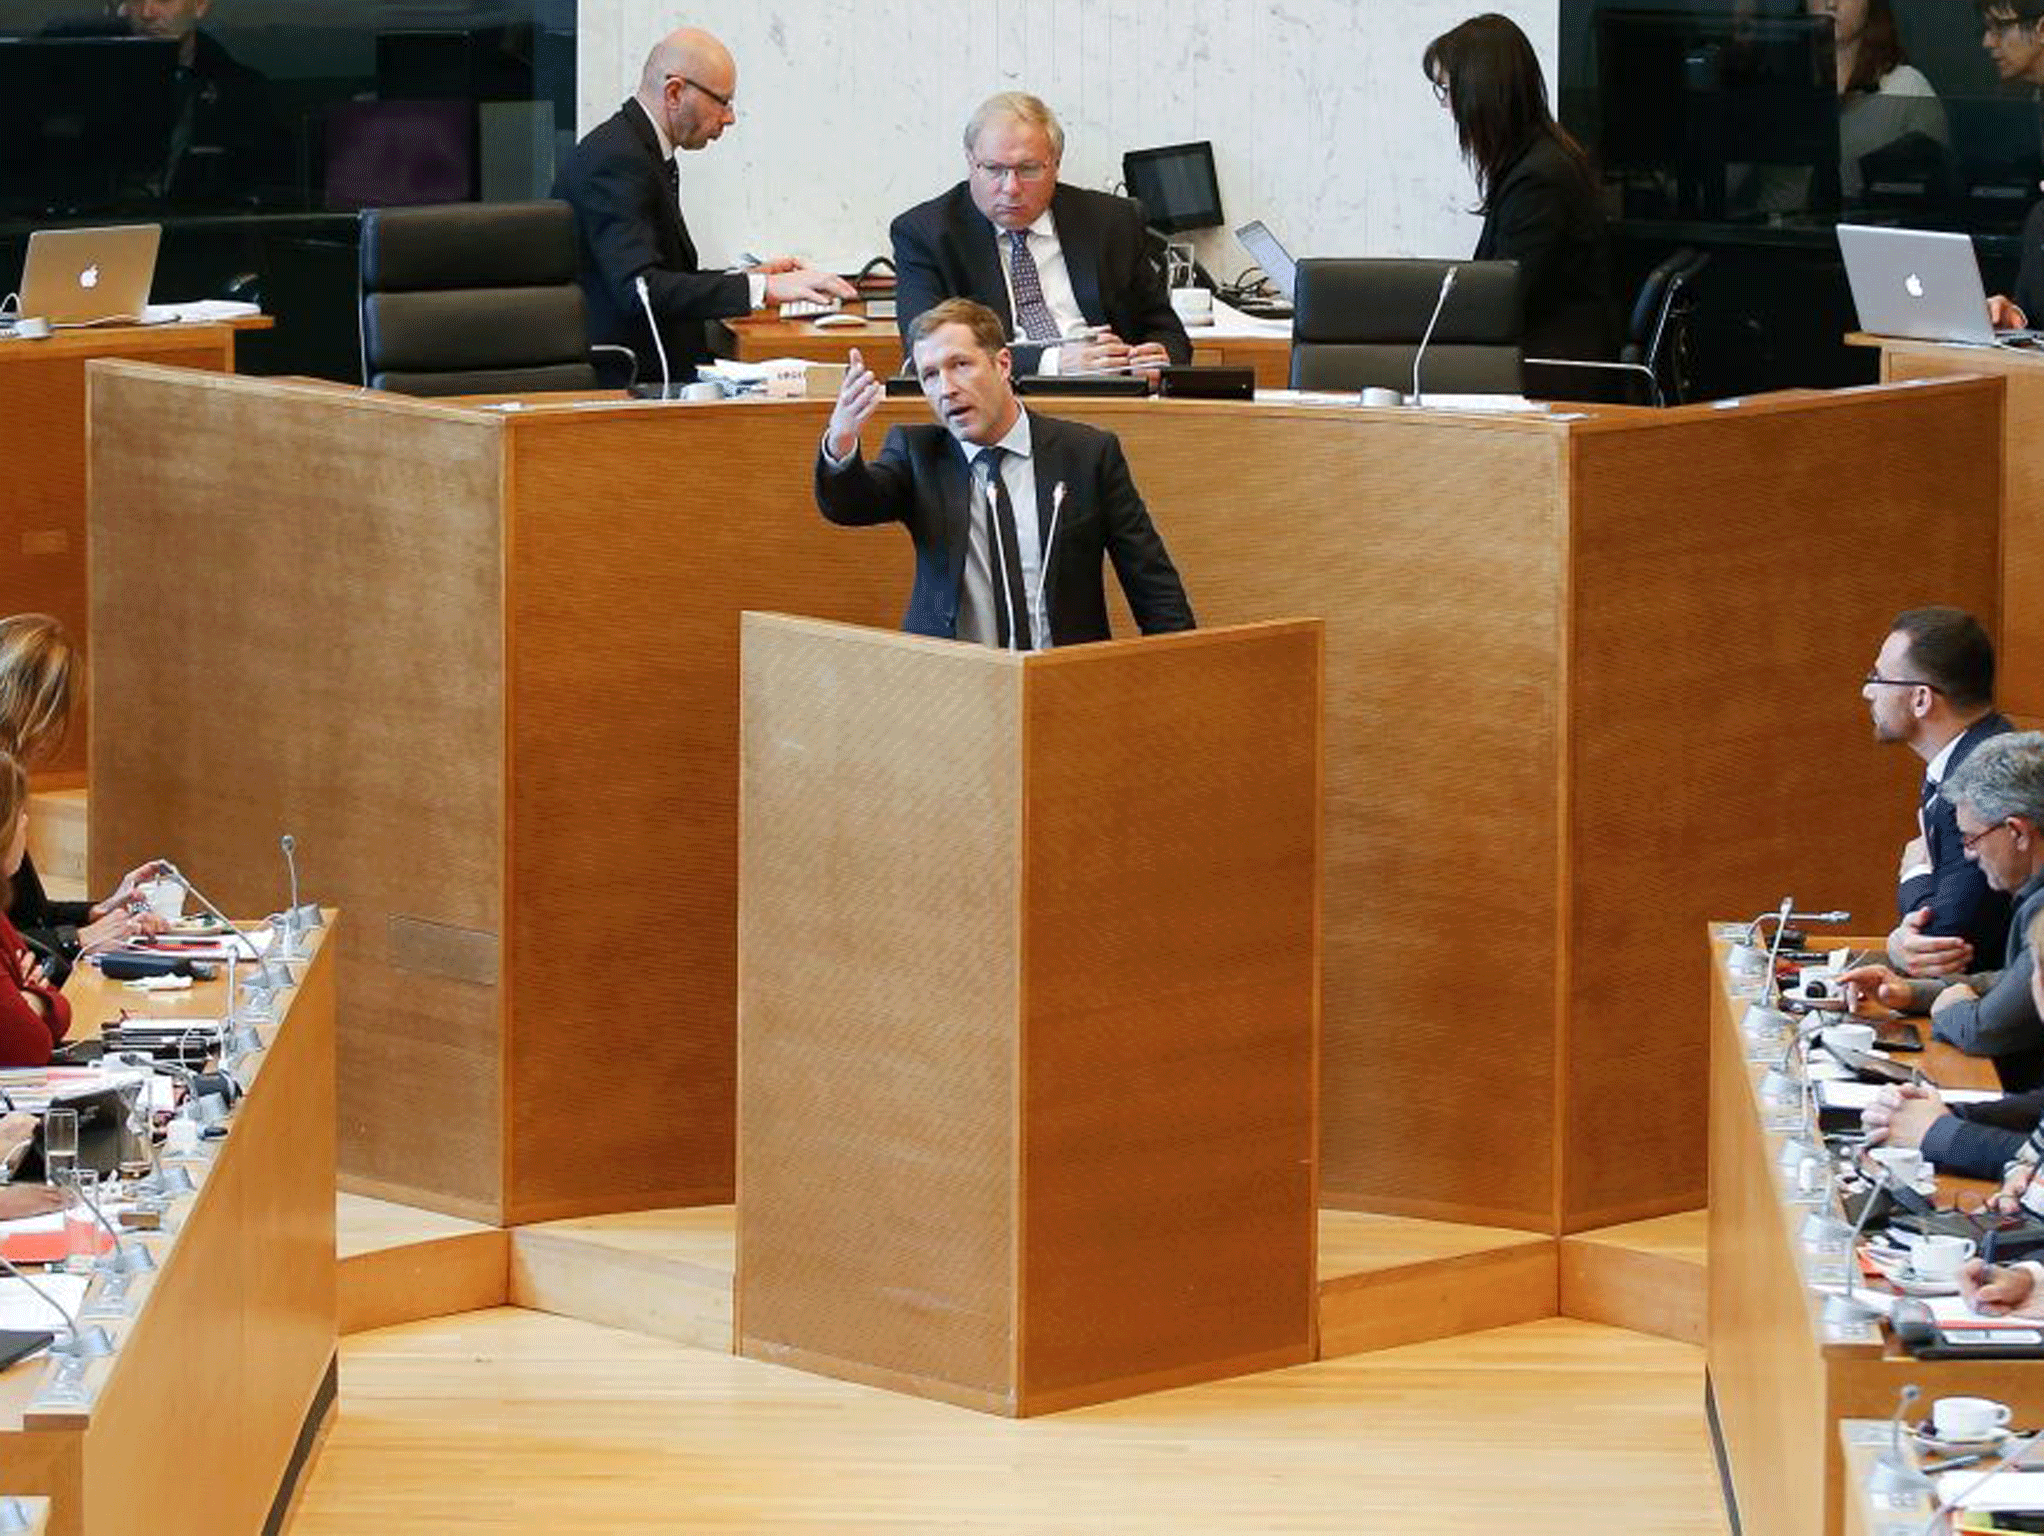 Paul Magnette, the president of Belgium's French-speaking region of Wallonia, giving a speech